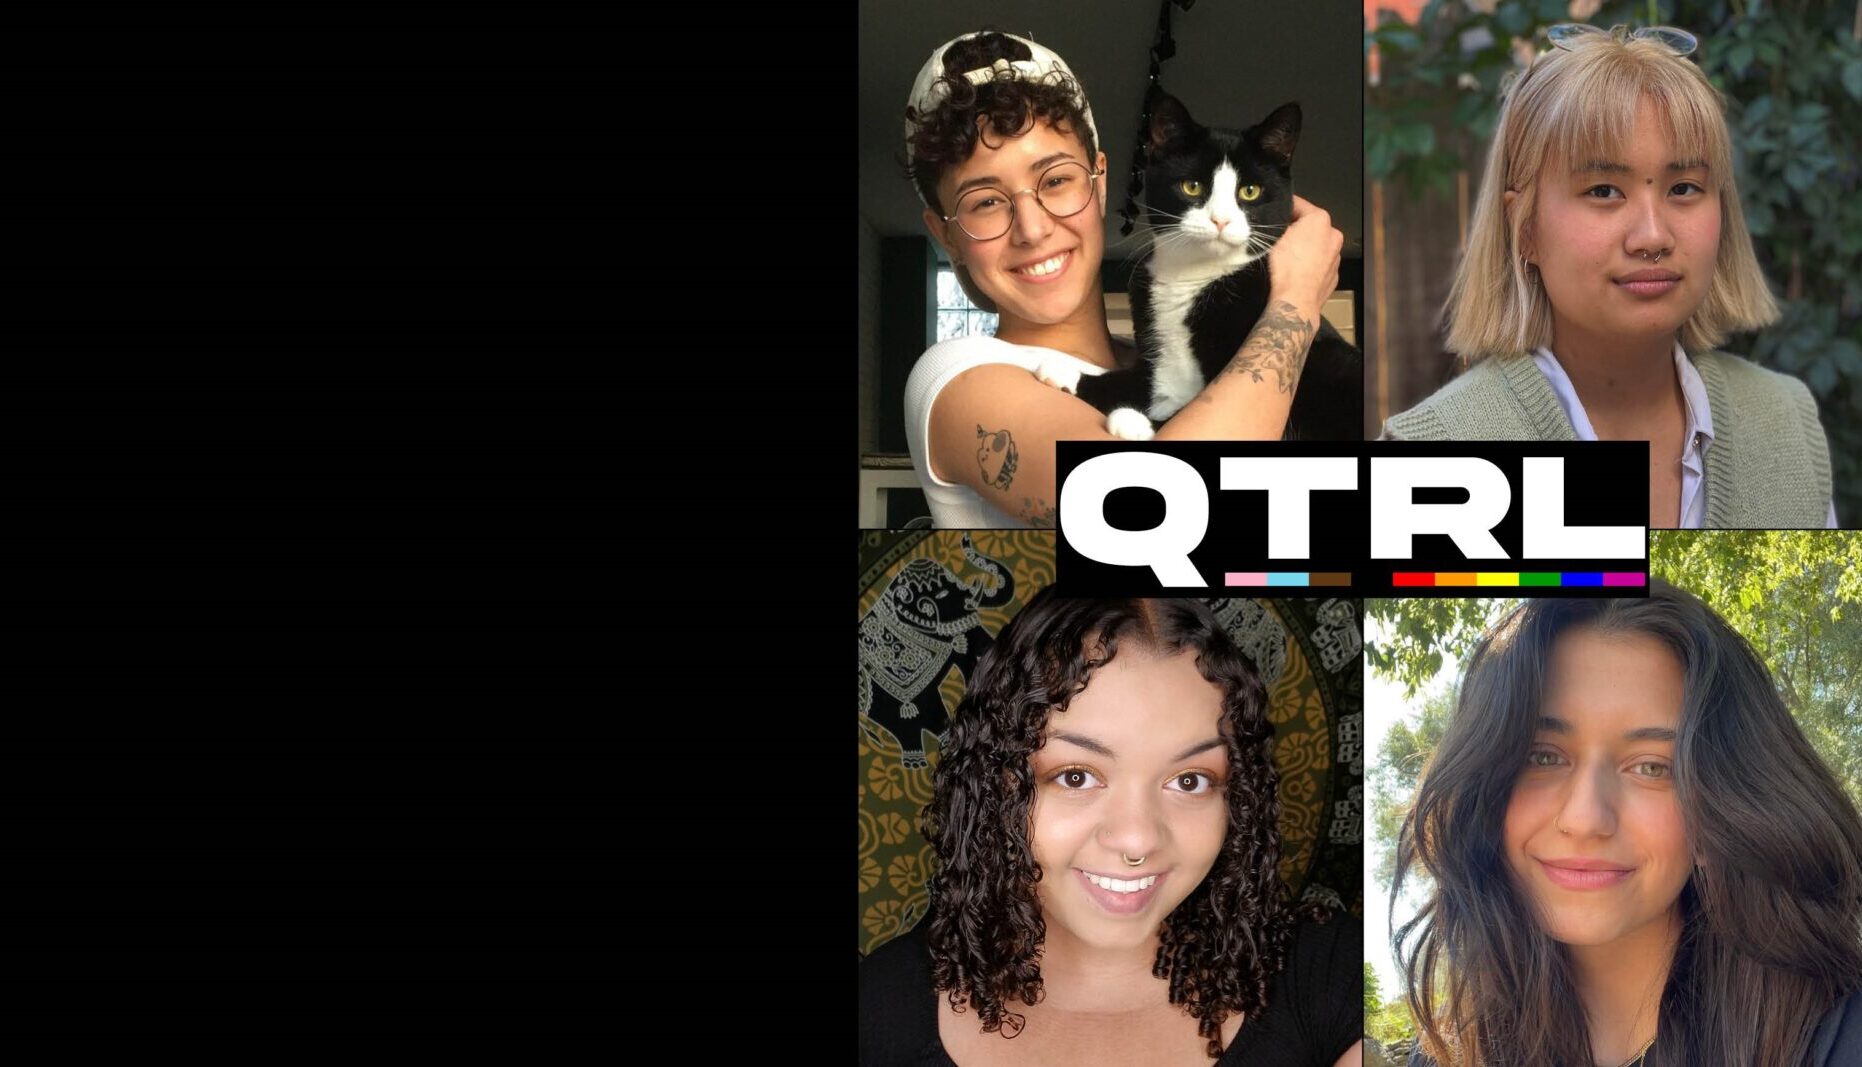 Banner featuring pictures of the four undergraduate research assistants alongside the Queer and Trans Research Lab logo.